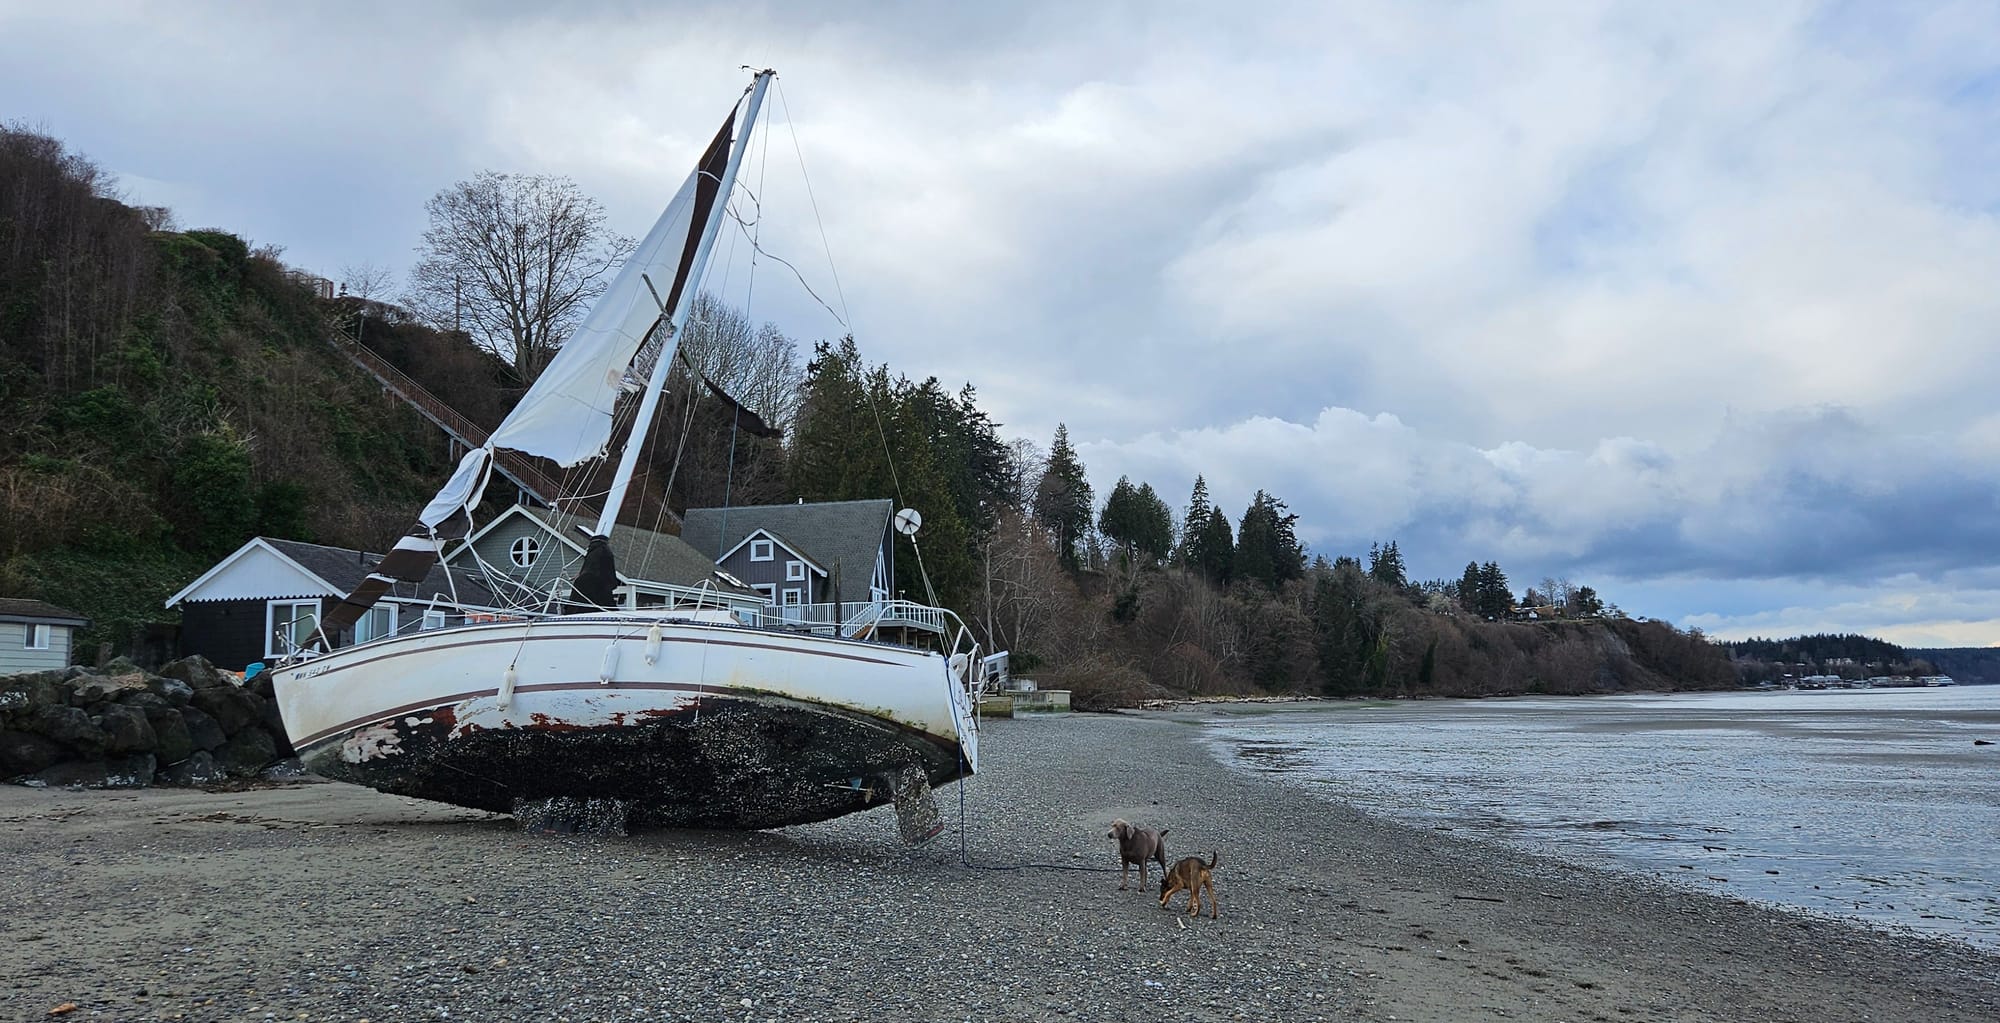 A sailboat with a torn sail, covered in barnacles washed up on a beach with two dogs nearby.